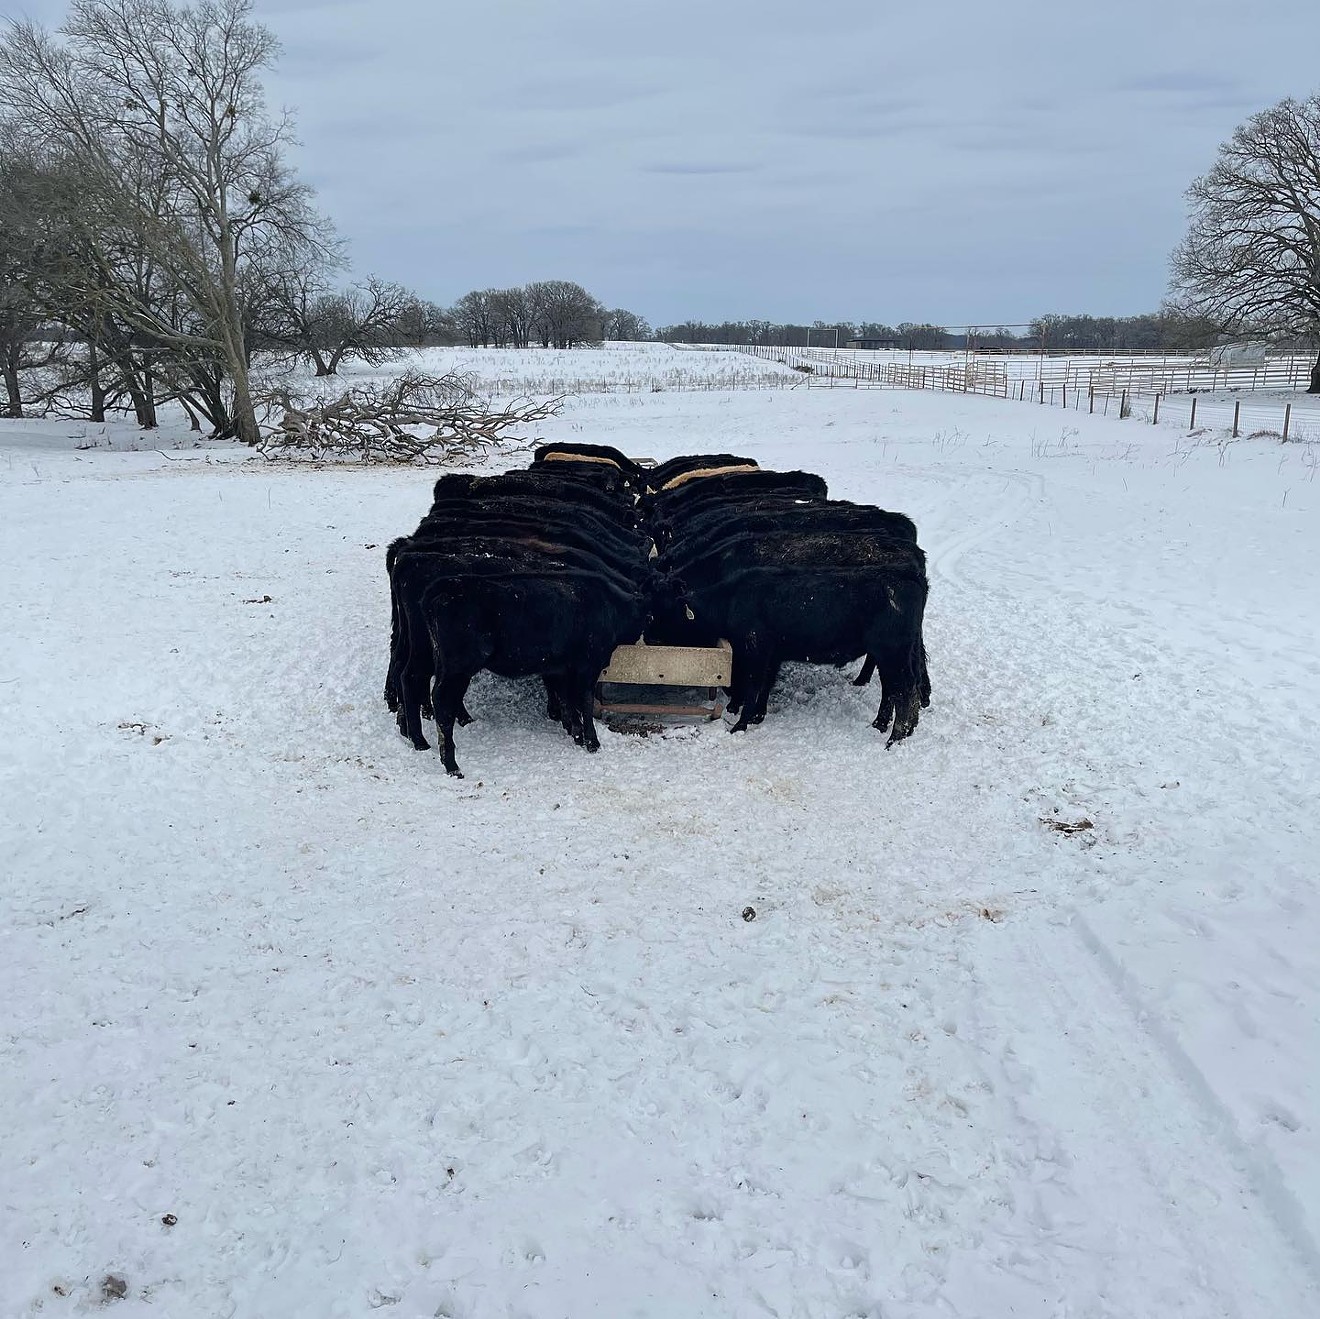 Cows were given extra sustenance during the frigid temperatures to help them endure the stress of the storm.